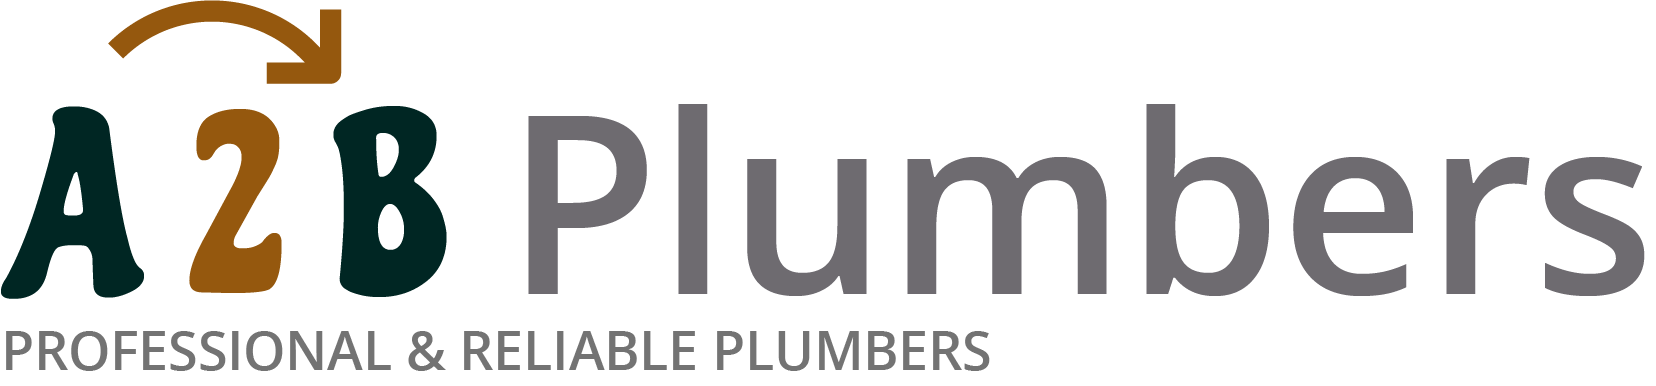 If you need a boiler installed, a radiator repaired or a leaking tap fixed, call us now - we provide services for properties in Formby and the local area.